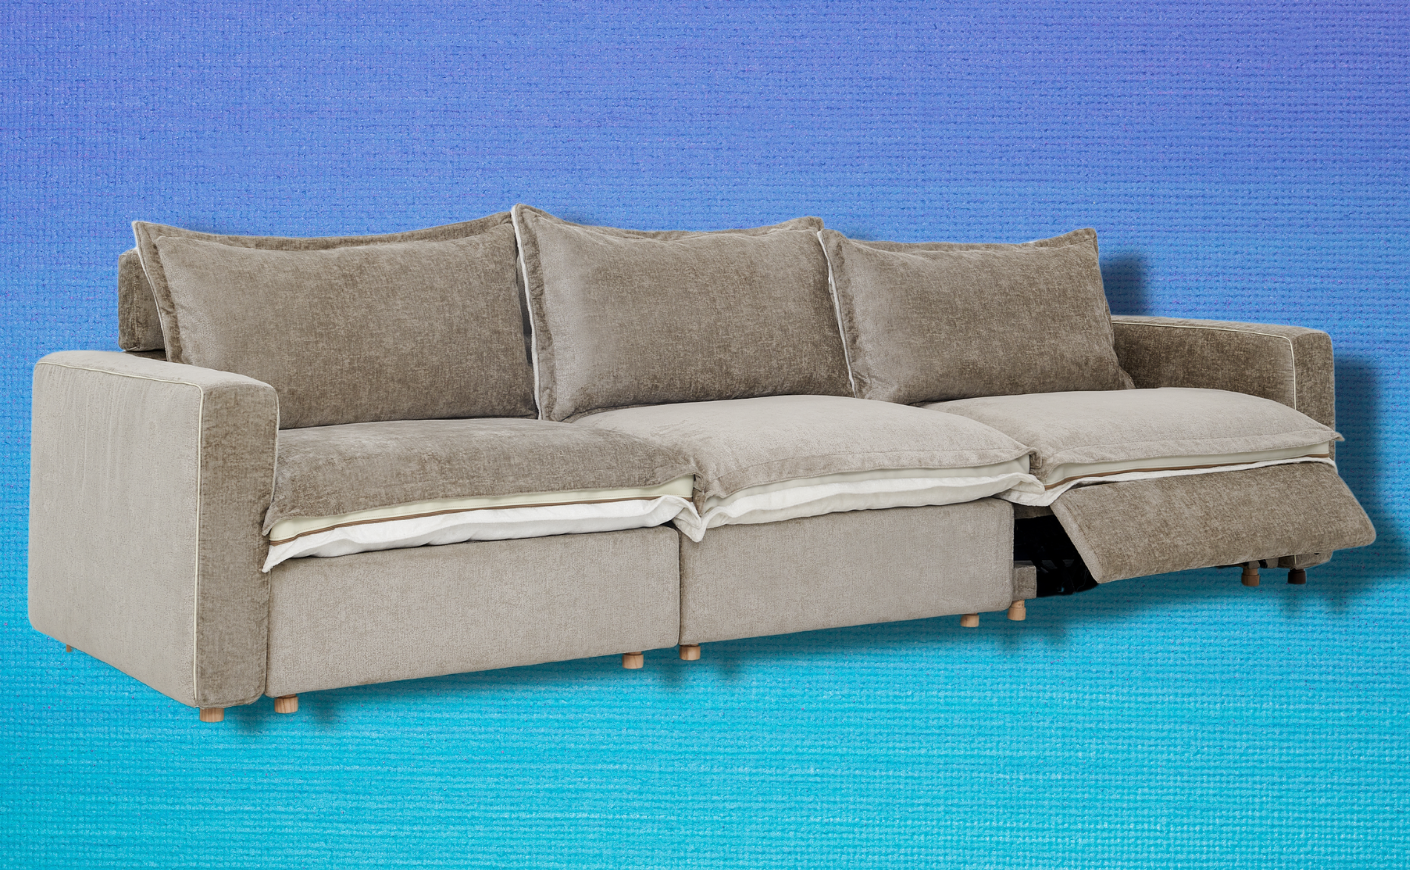 Homebody Couch Review Is This Sofa